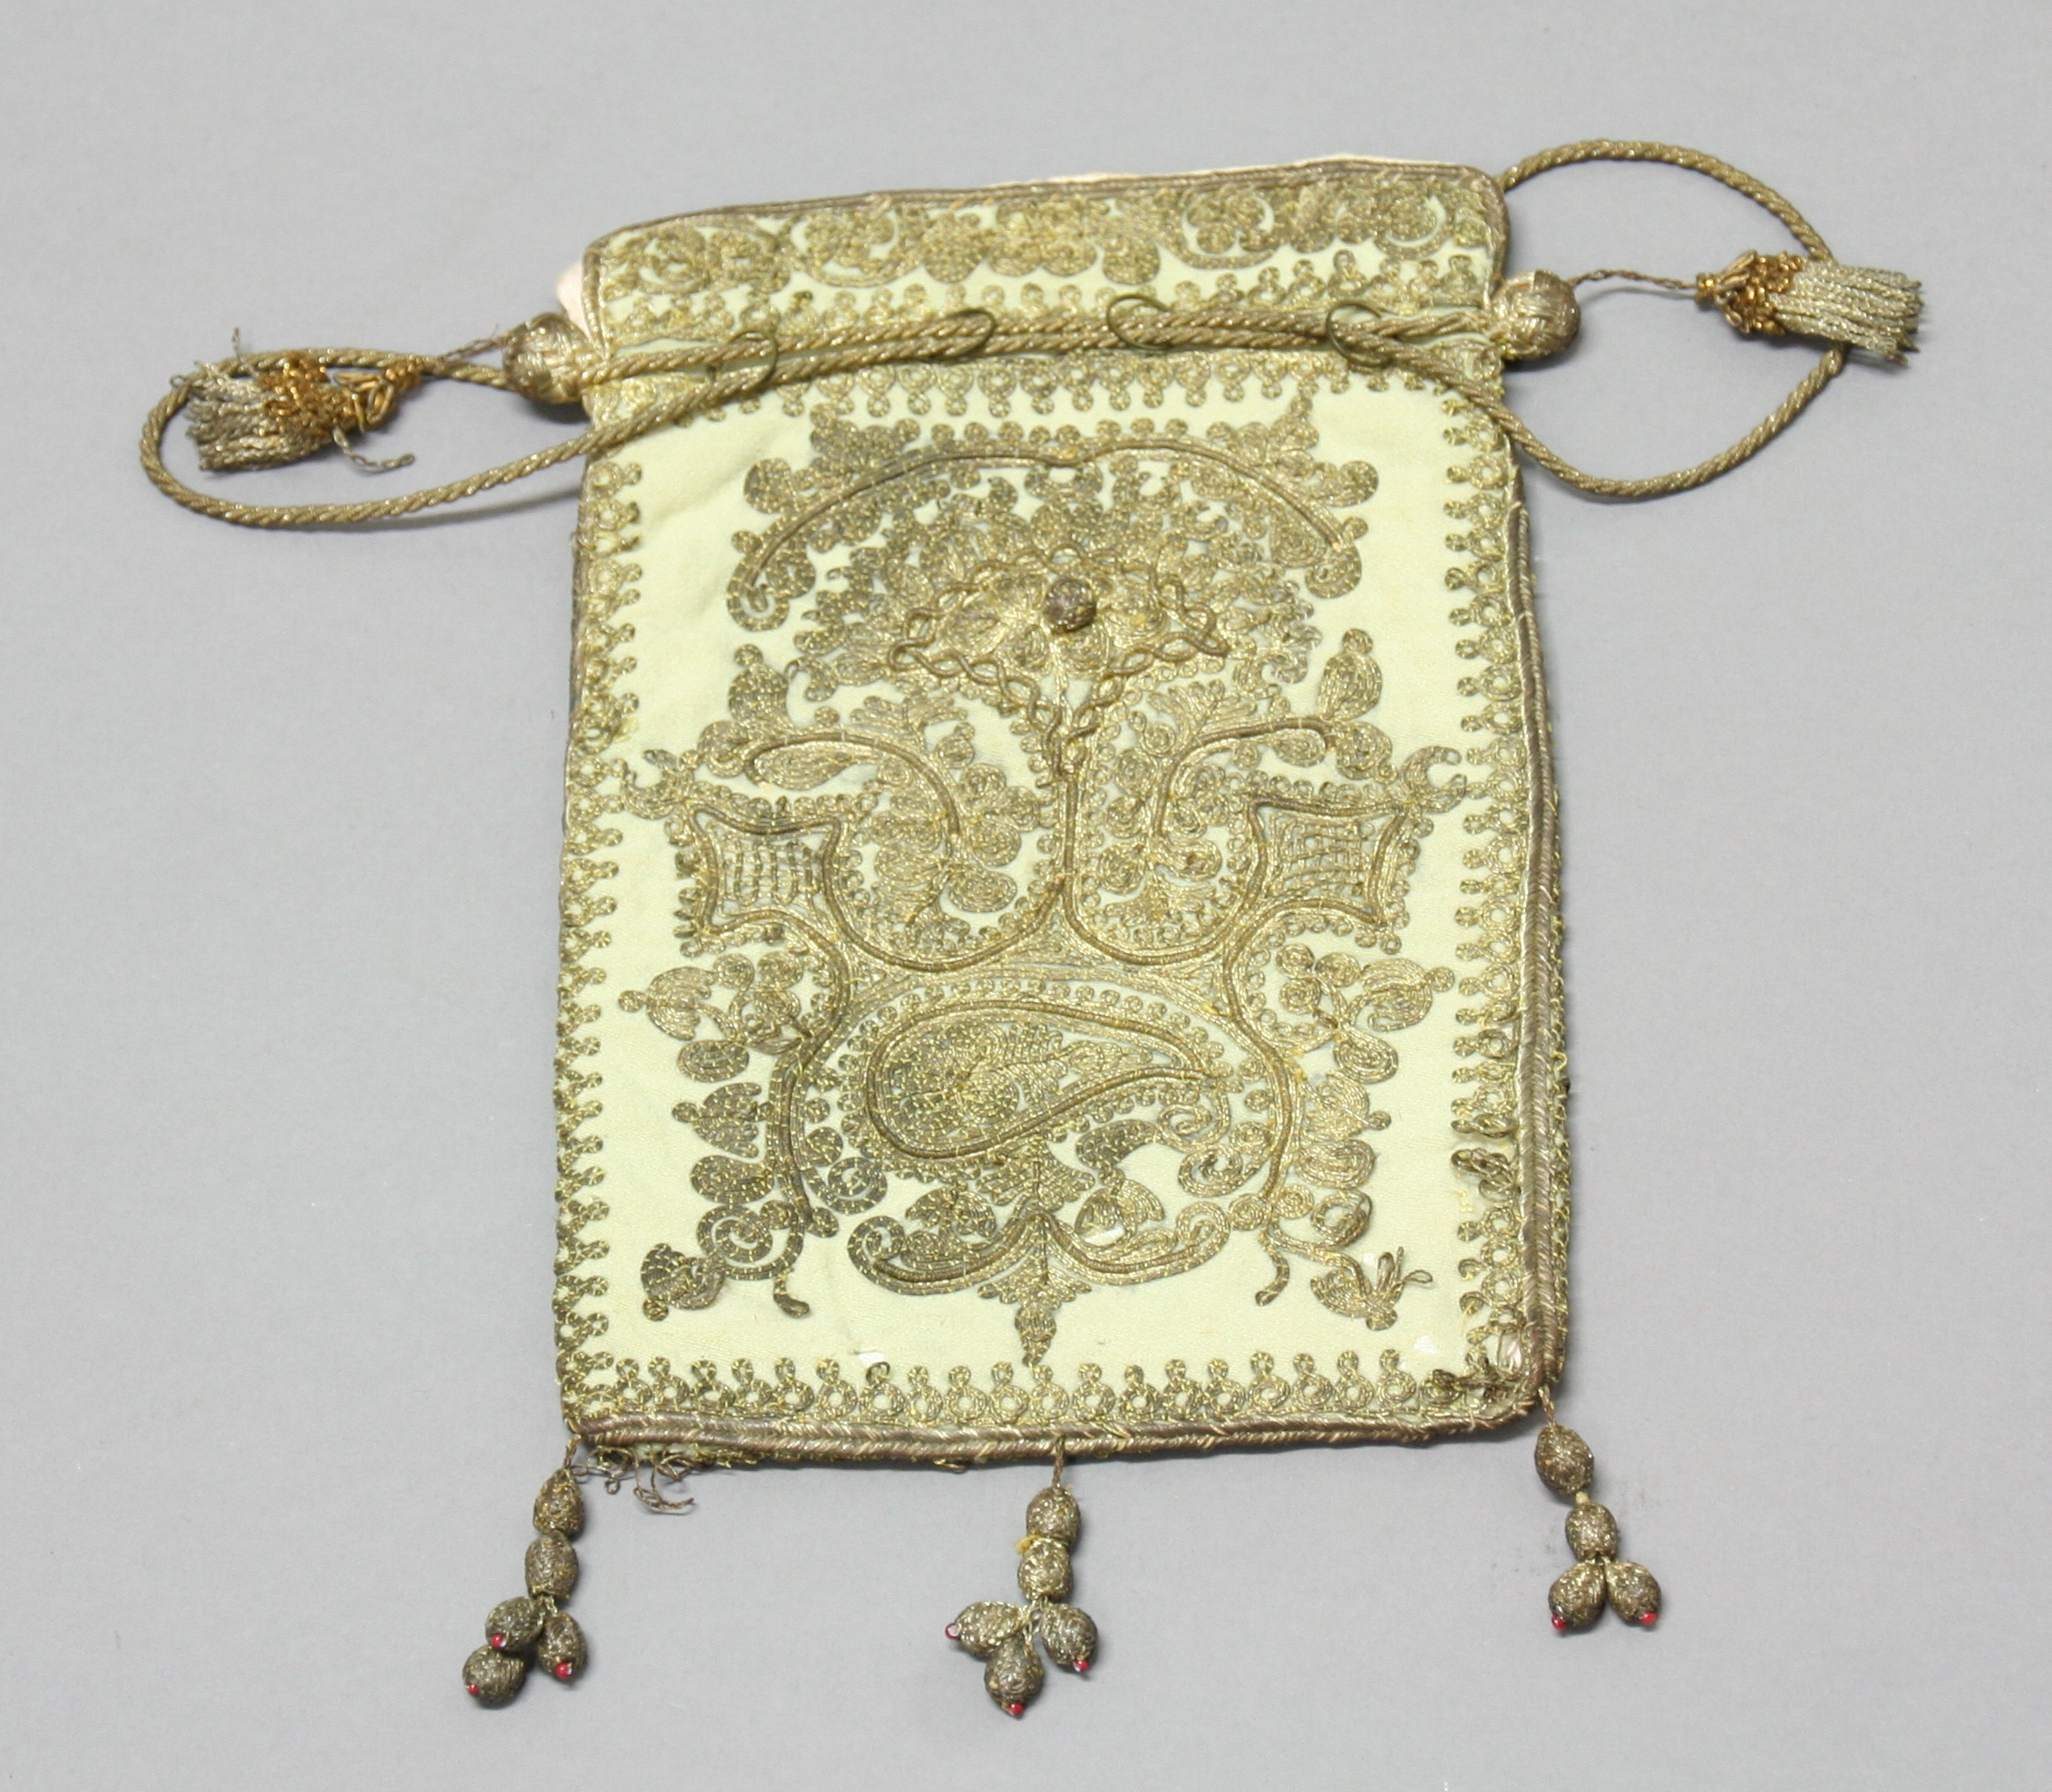 INDO-PERSIAN GILT WIRE WORK BAG, the floral design in relief, on a cream ground, 27cm x 17cm